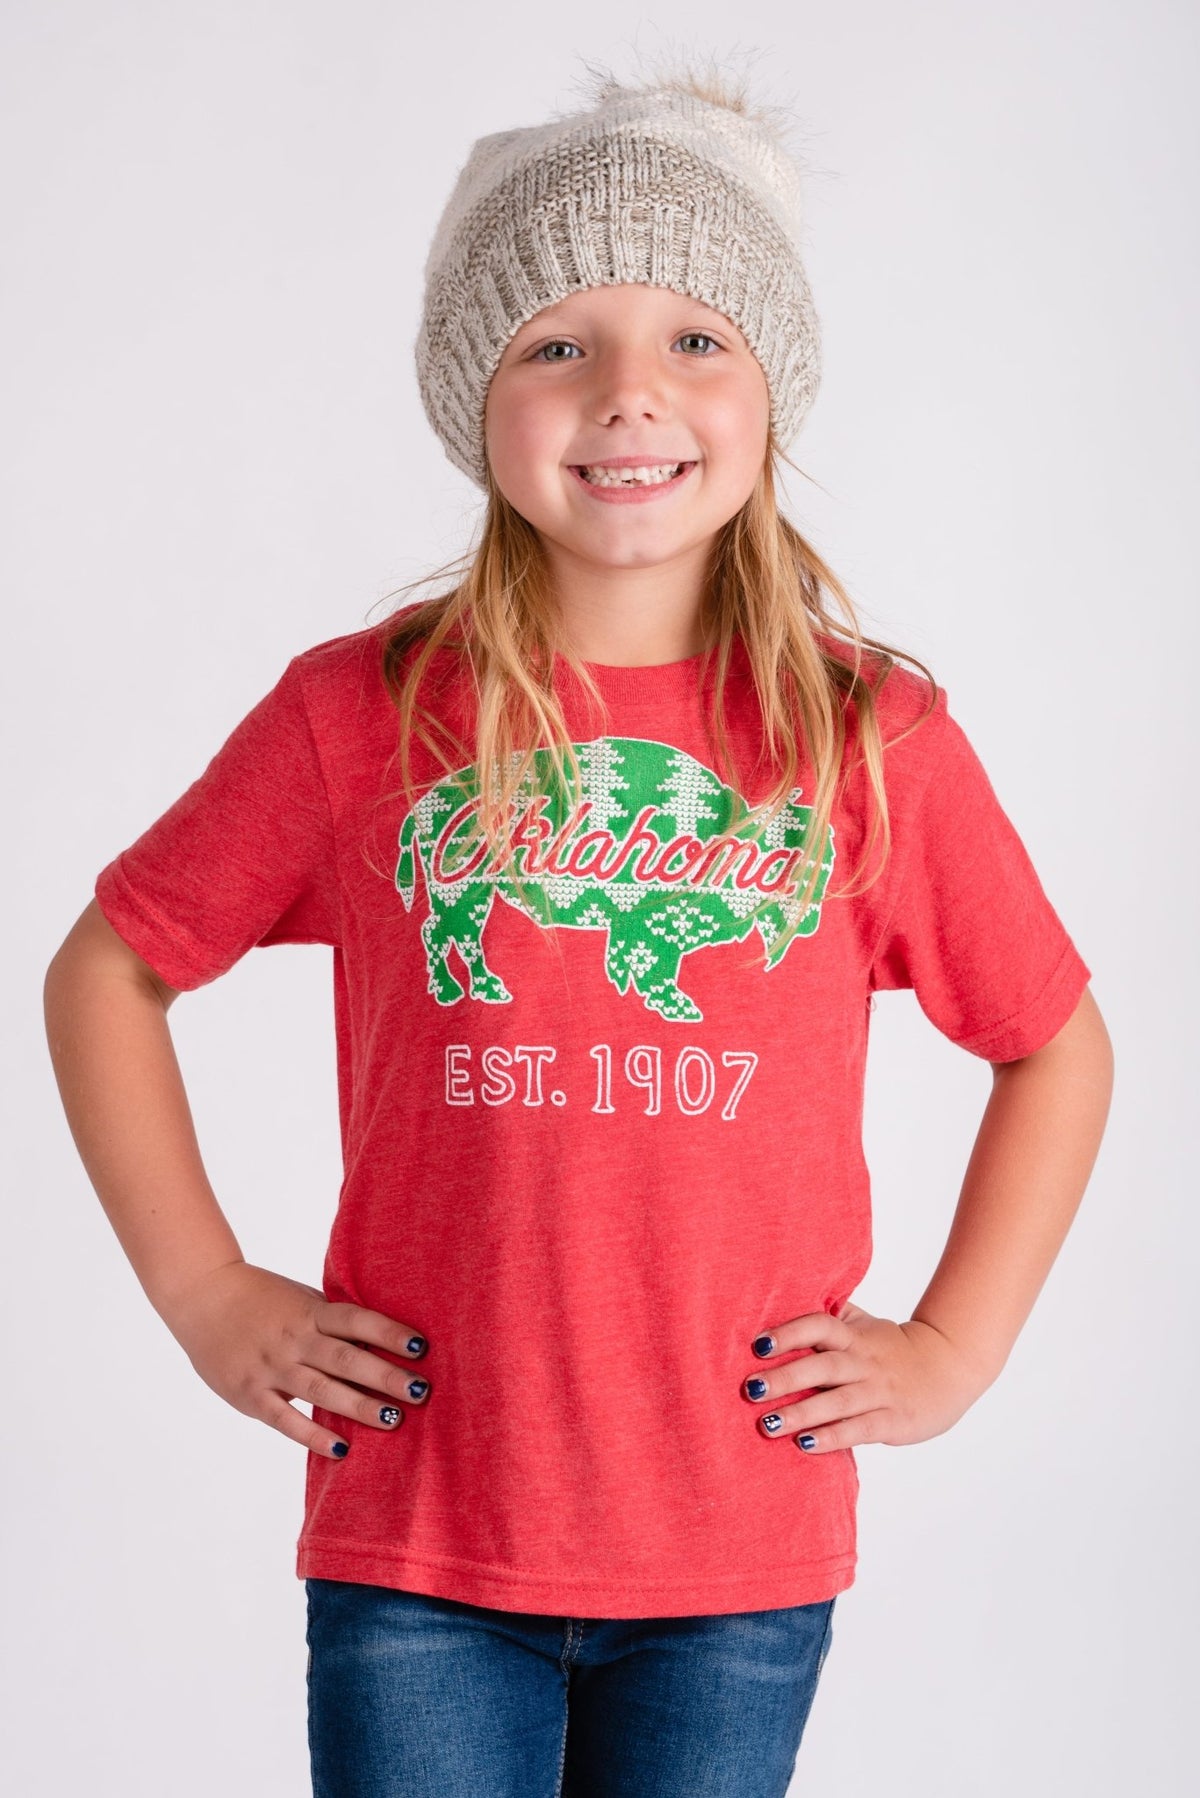 KIDS Oklahoma tree bison t-shirt red - Cute T-shirts - Trendy Graphic T-Shirts at Lush Fashion Lounge Boutique in Oklahoma City